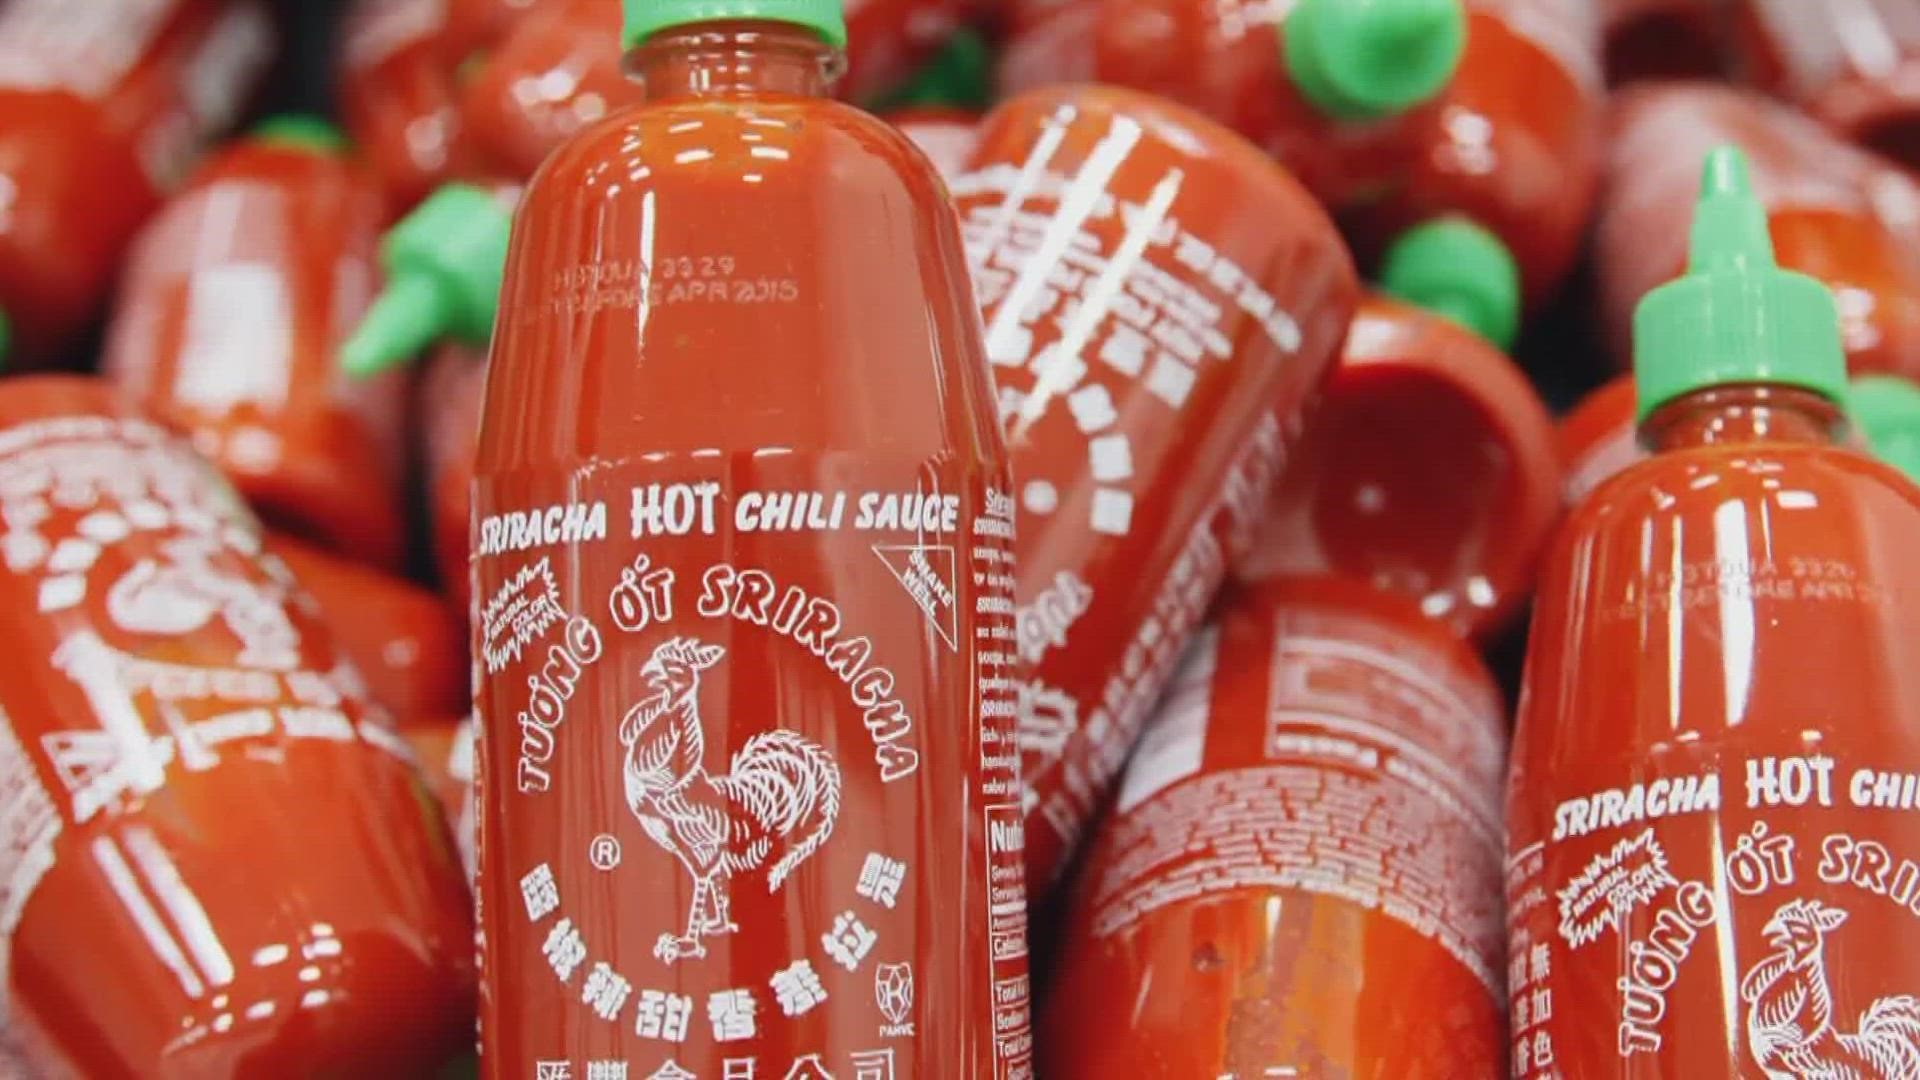 The company says there's a shortage of chili peppers that's affecting distribution.